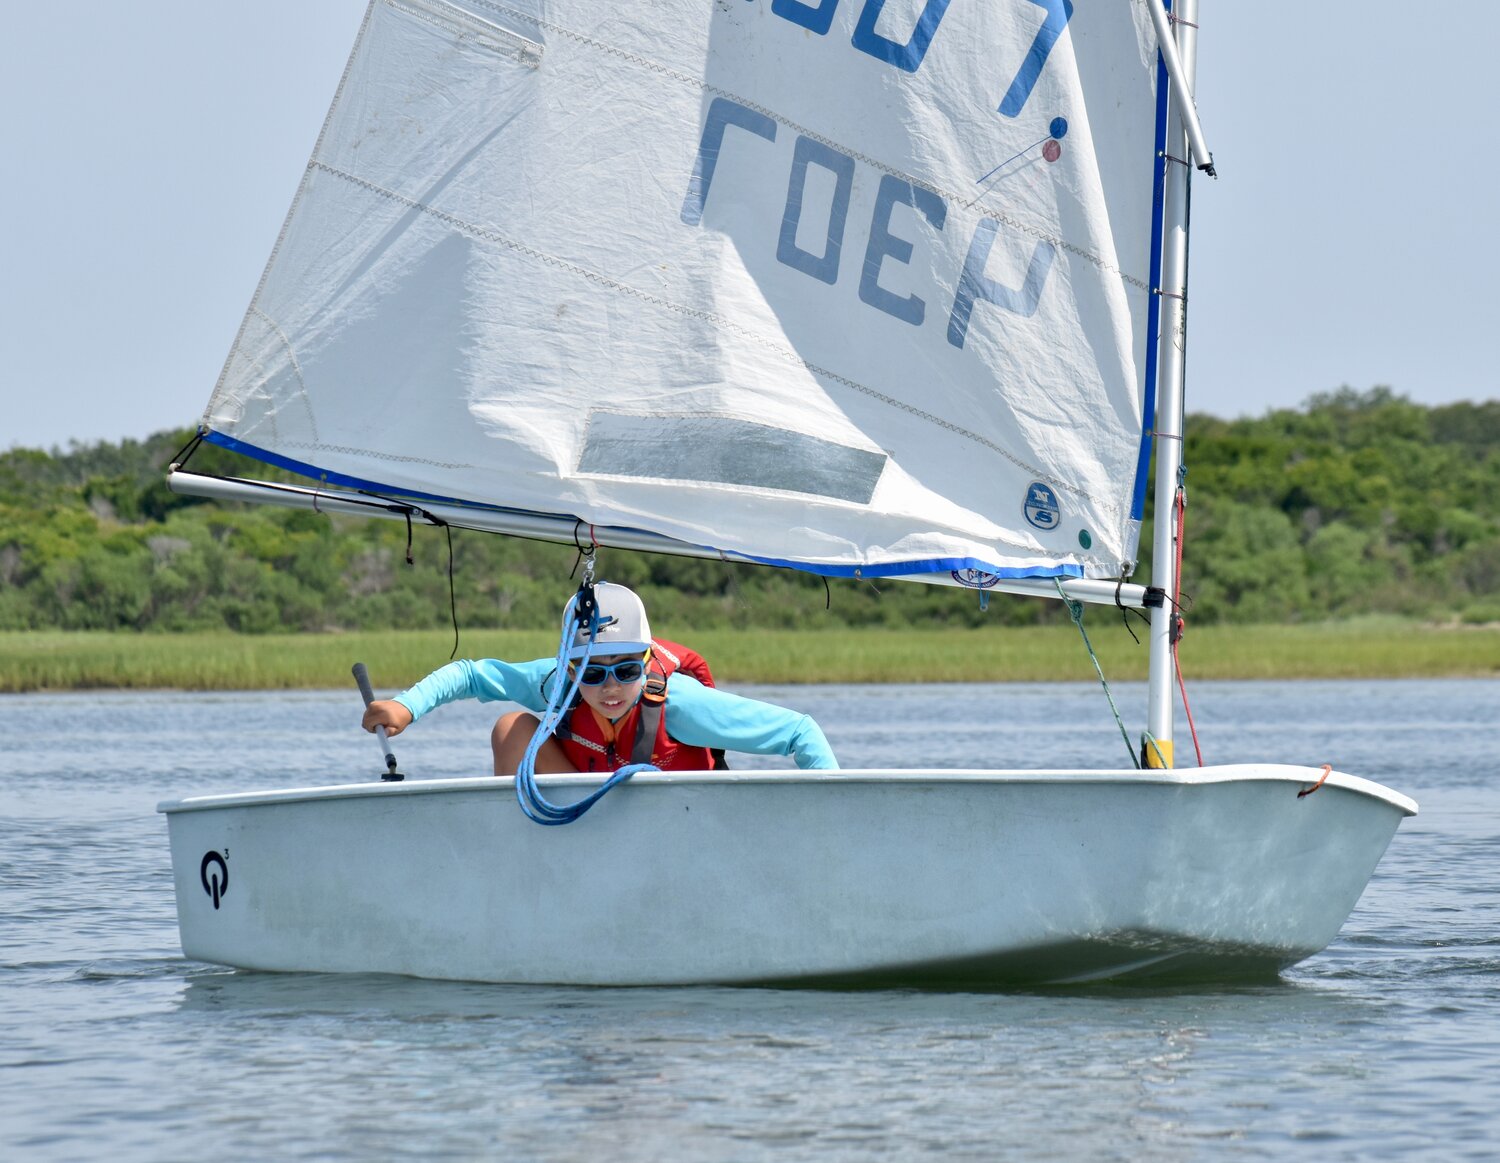 Nantucket Community Sailing hosted the annual Coffin Cup Friday at Polpis Harbor.